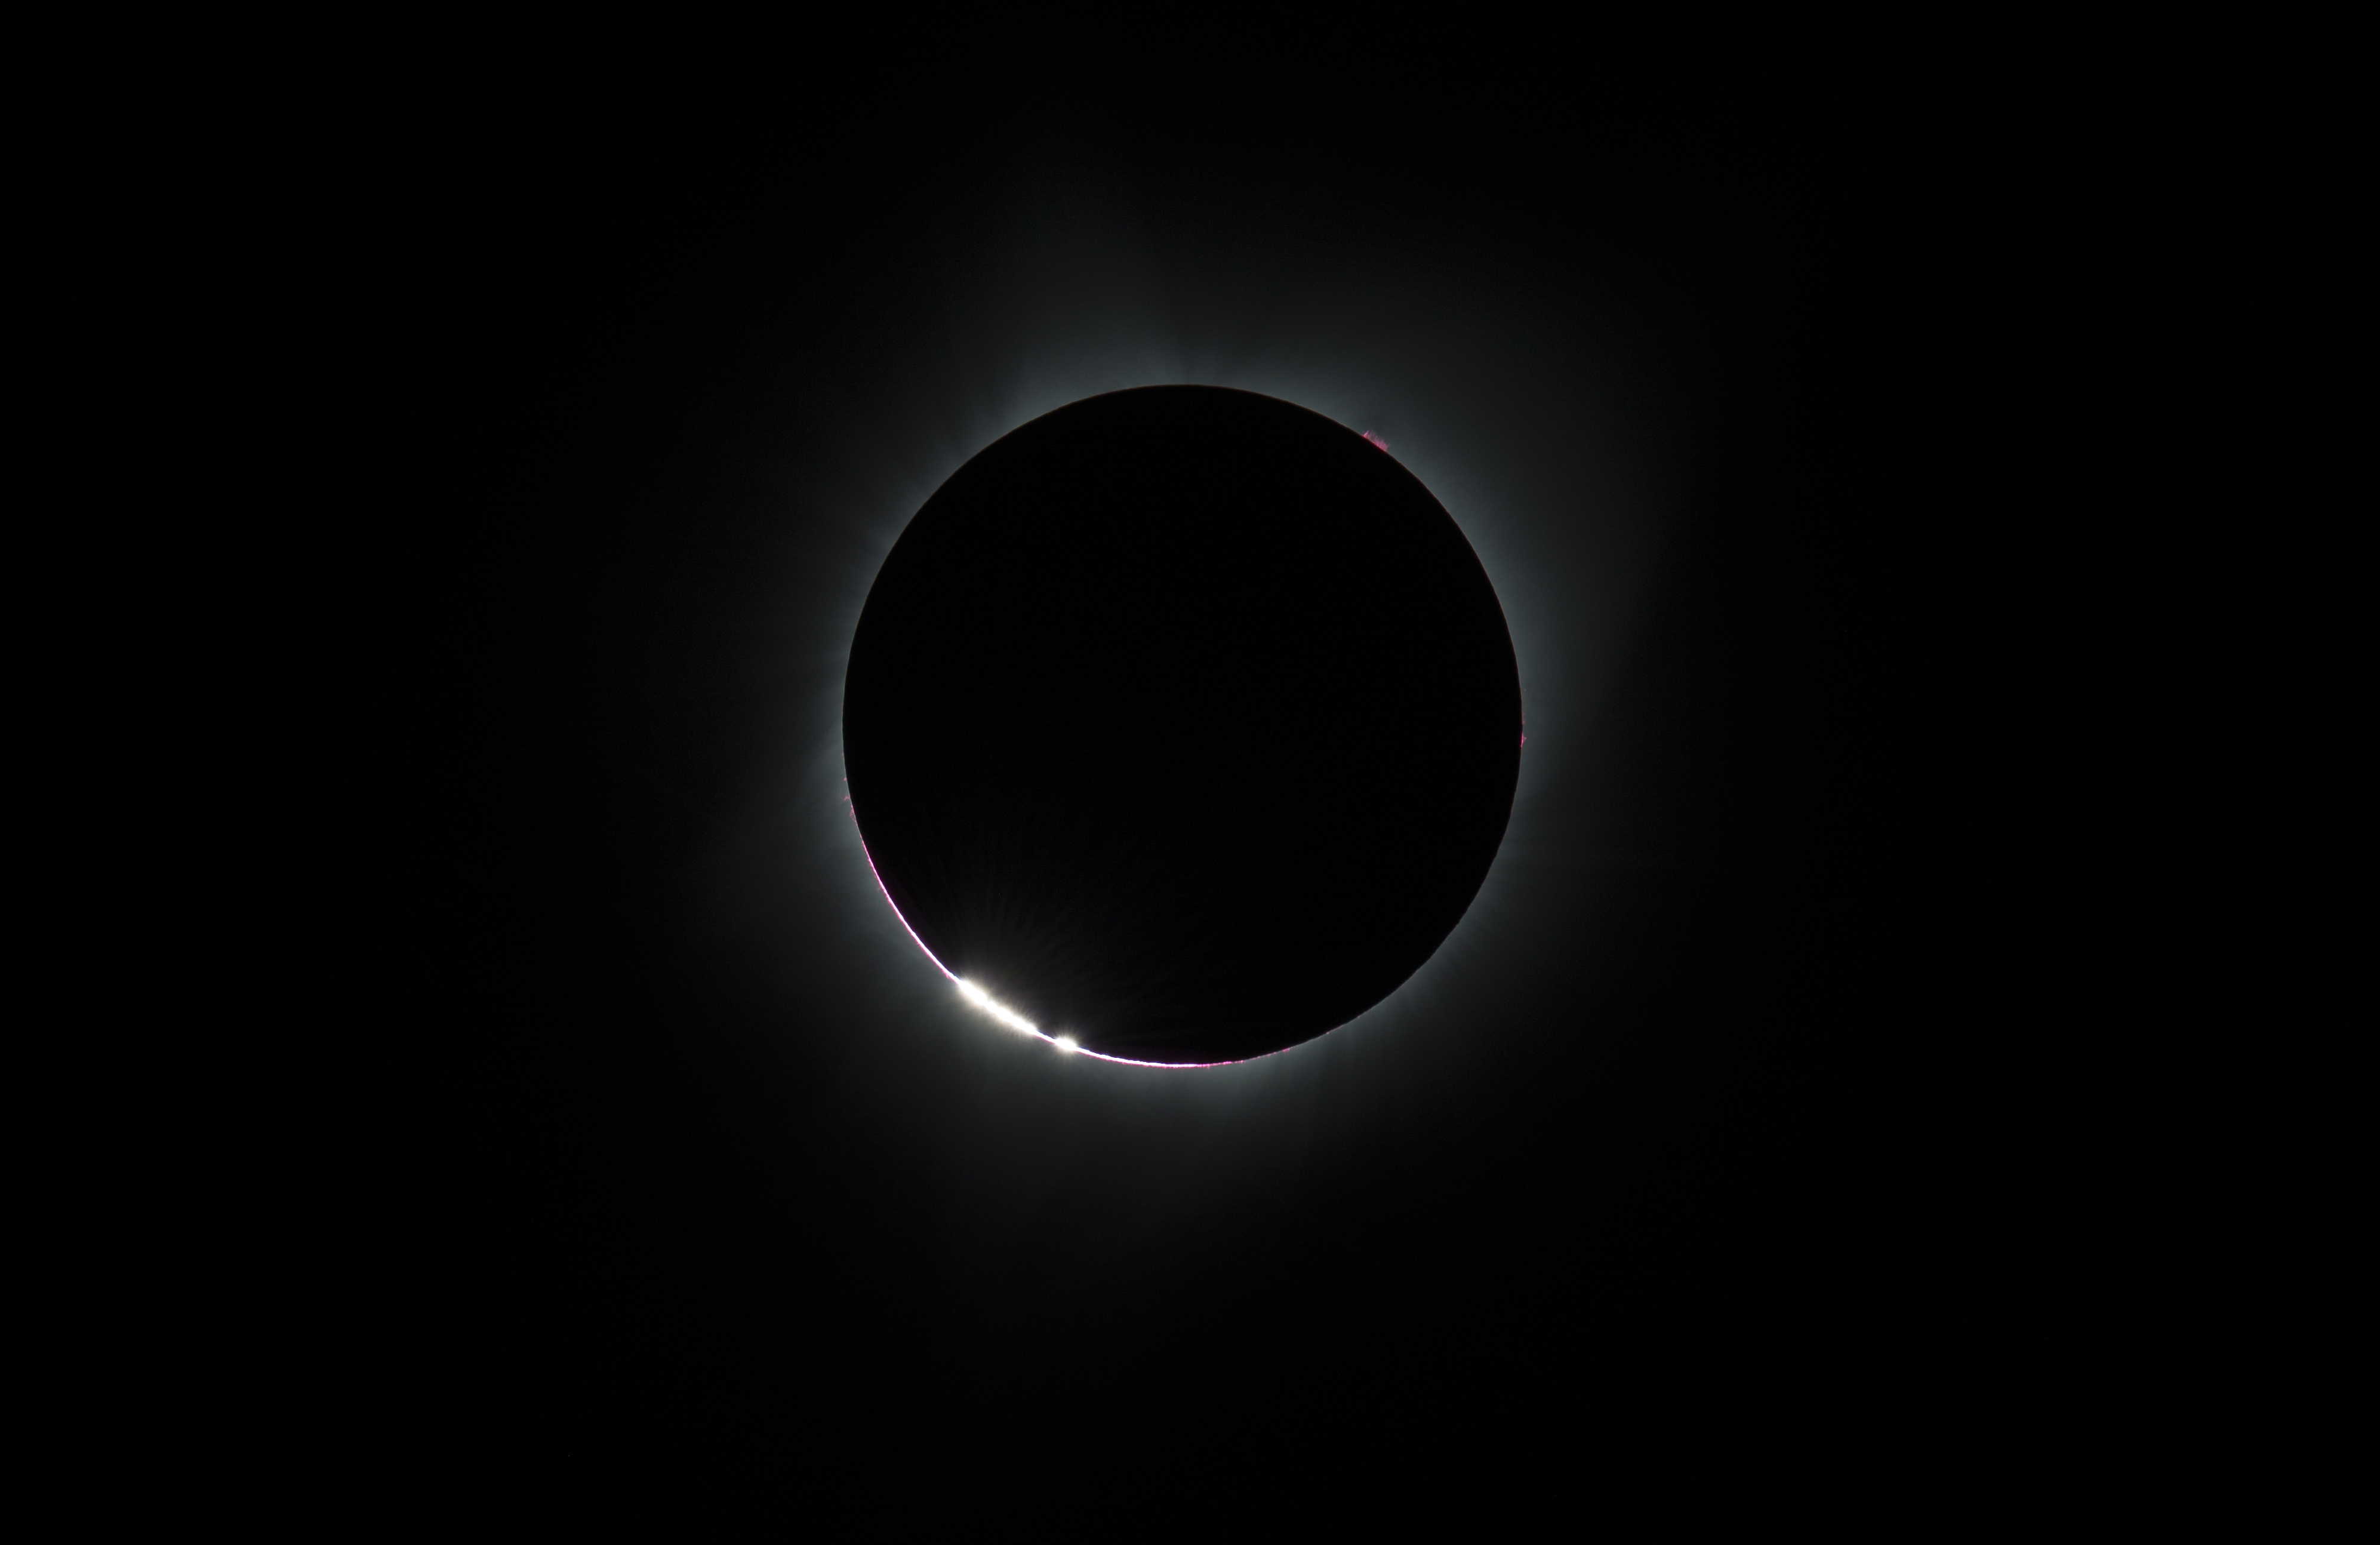 HANDOUT'- The Bailey's Beads effect is seen as the moon makes its final move over the sun during the total solar eclipse on Monday, August 21, 2017 above Madras, Oregon. A total solar eclipse swept across a narrow portion of the contiguous United States from Lincoln Beach, Oregon to Charleston, South Carolina. A partial solar eclipse was visible across the entire North American continent along with parts of South America, Africa, and Europe. Mandatory Credit: Aubrey Gemignani / NASA via CNP - NO WIRE'SERVICE - Photo by: Aubrey Gemignani/picture-alliance/dpa/AP Images